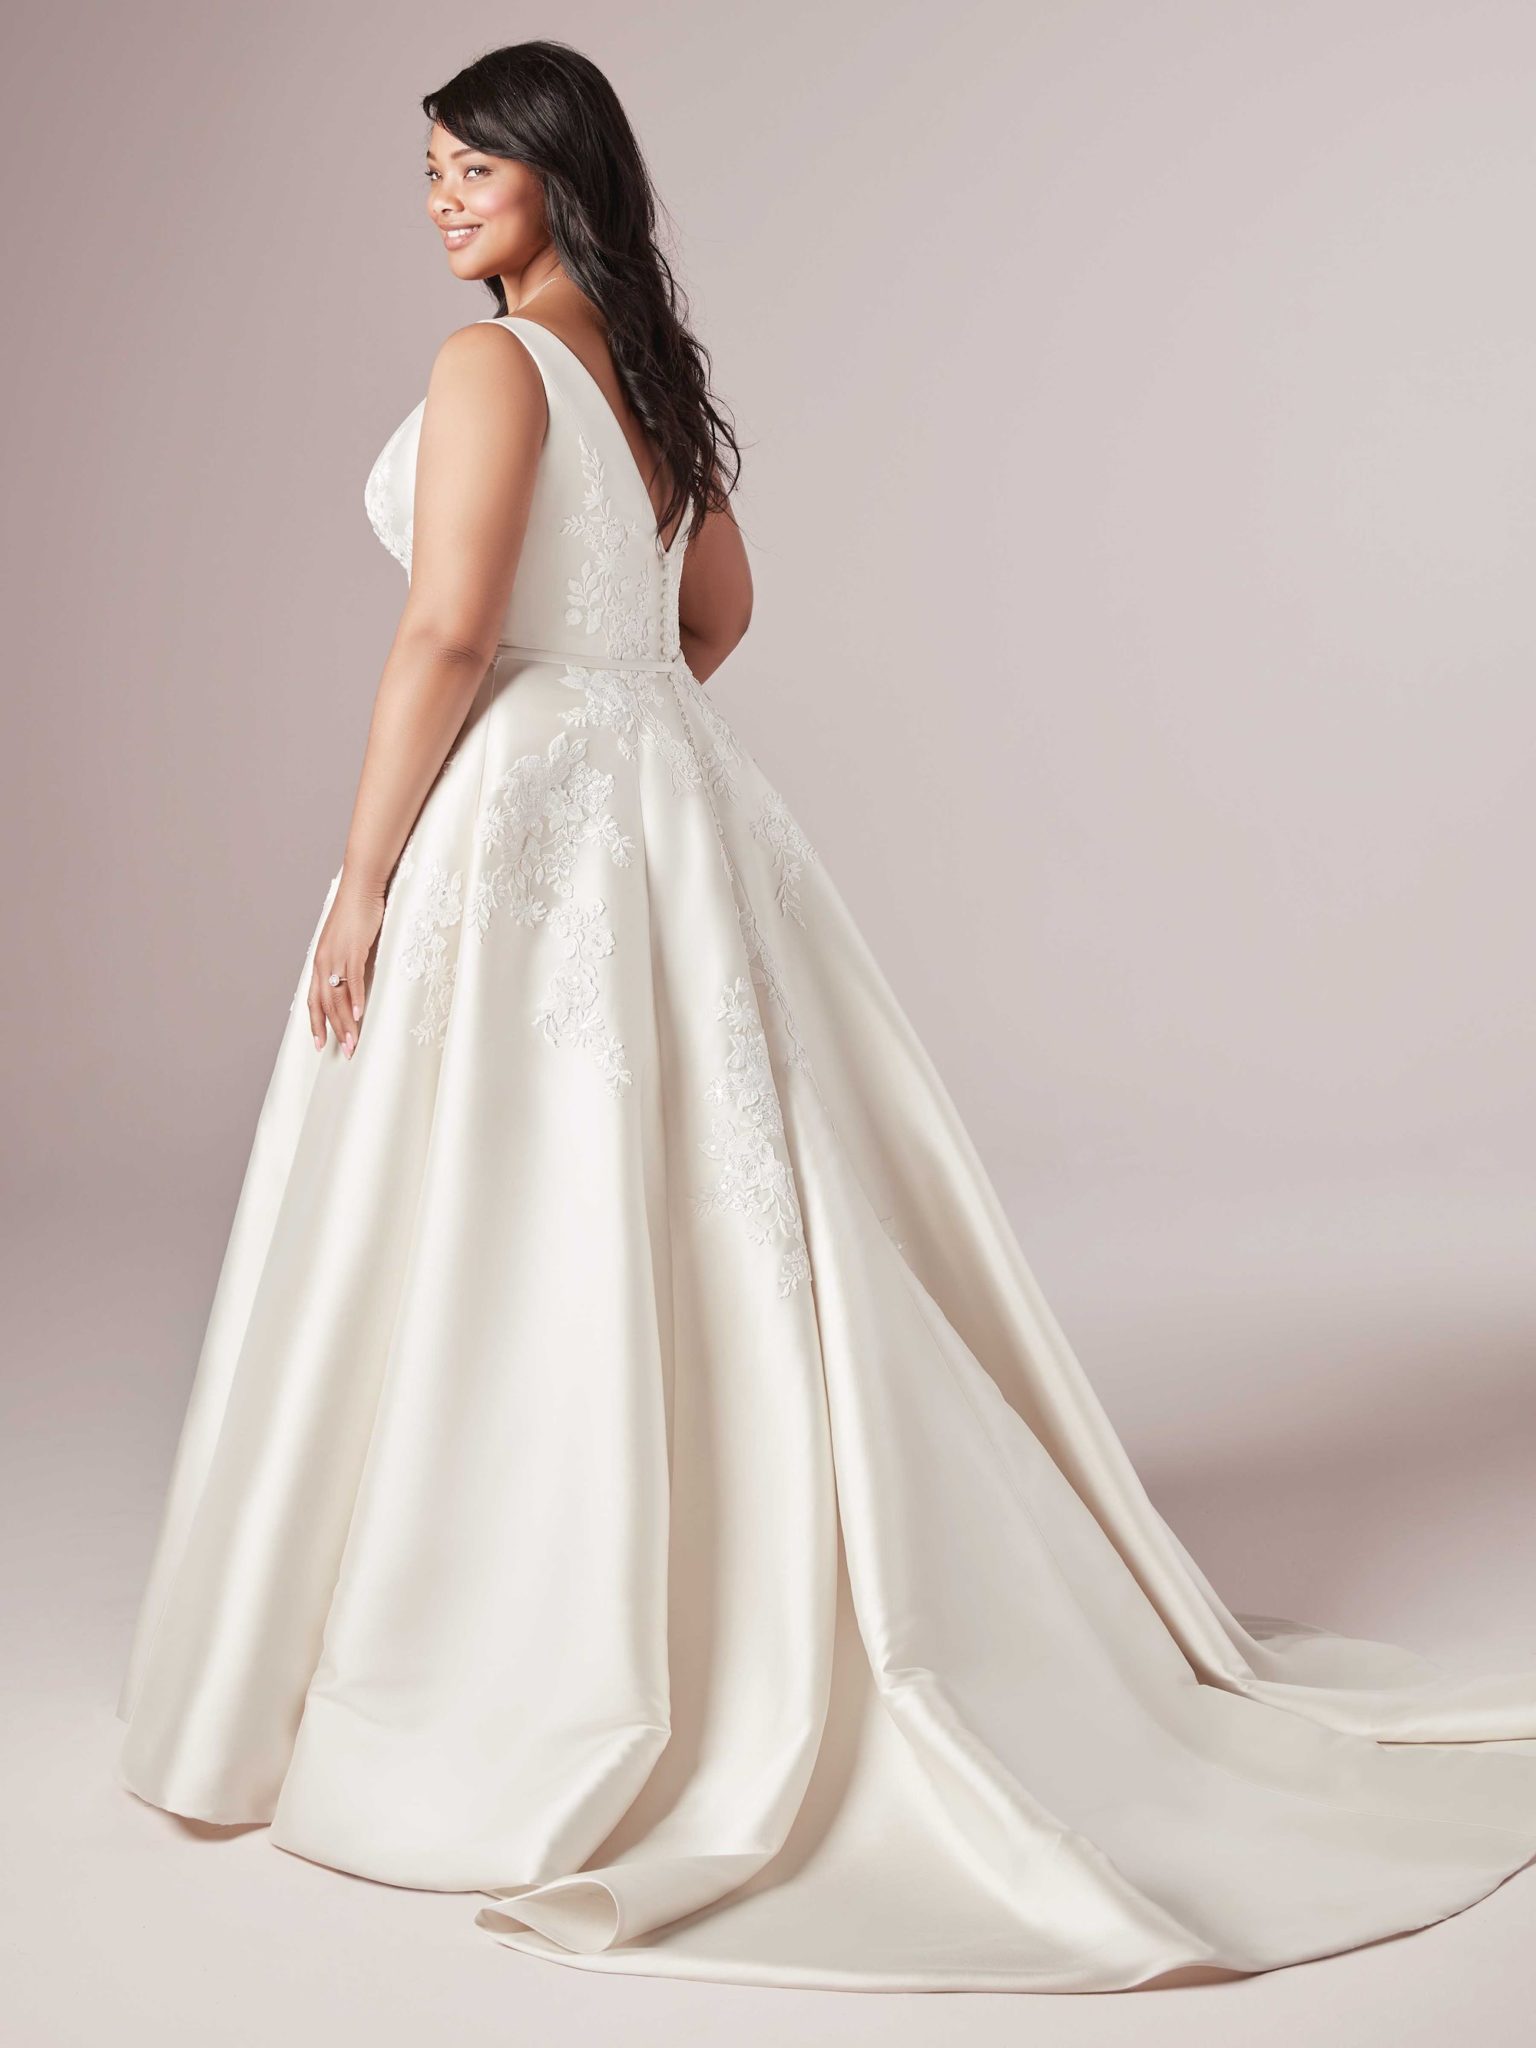 A woman wears the Valerie Lynette by Maggie Sottero